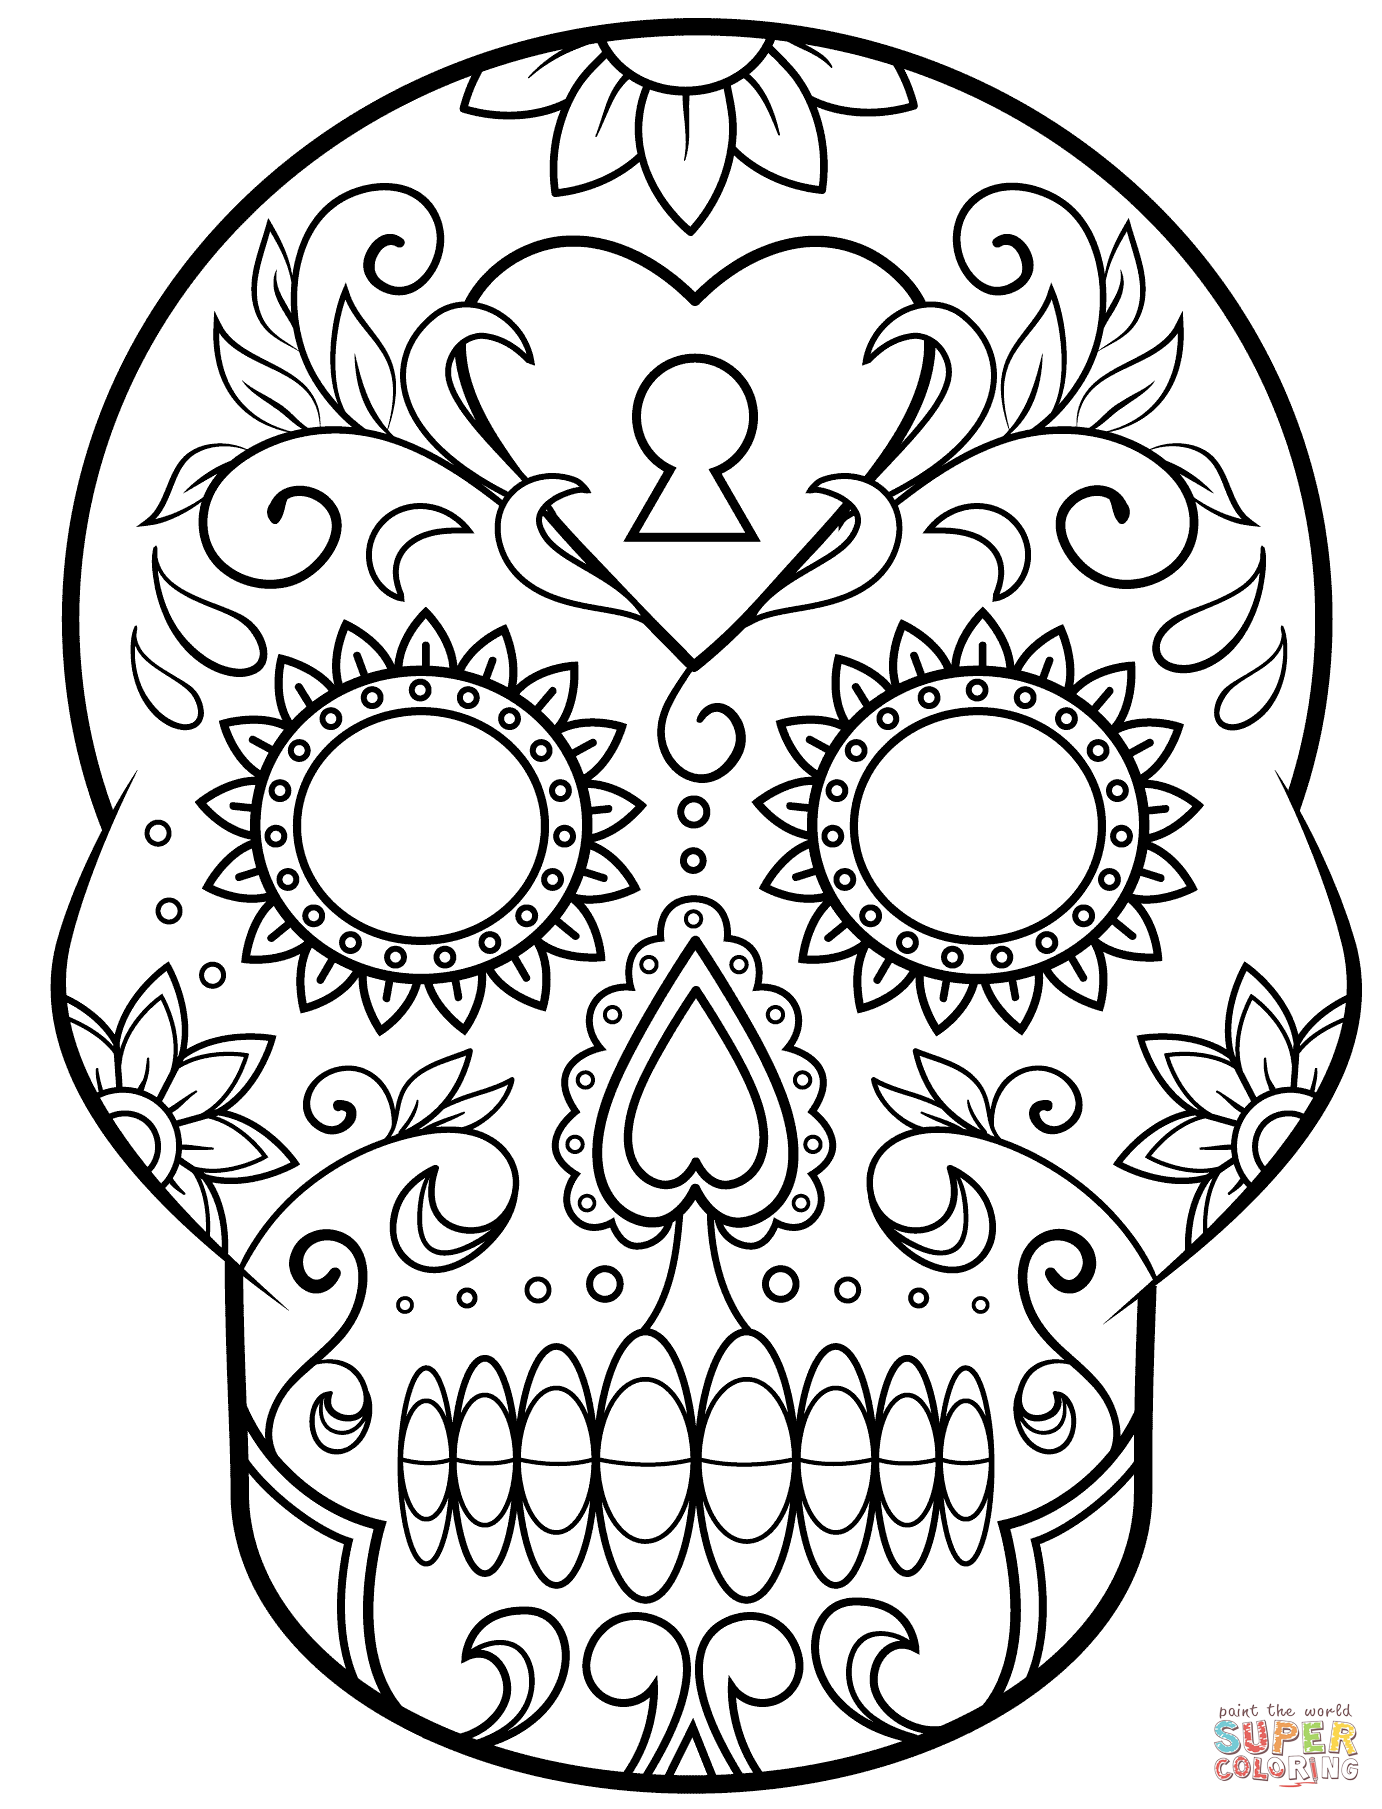 Day of the Dead Sugar Skull coloring page | Free Printable ...